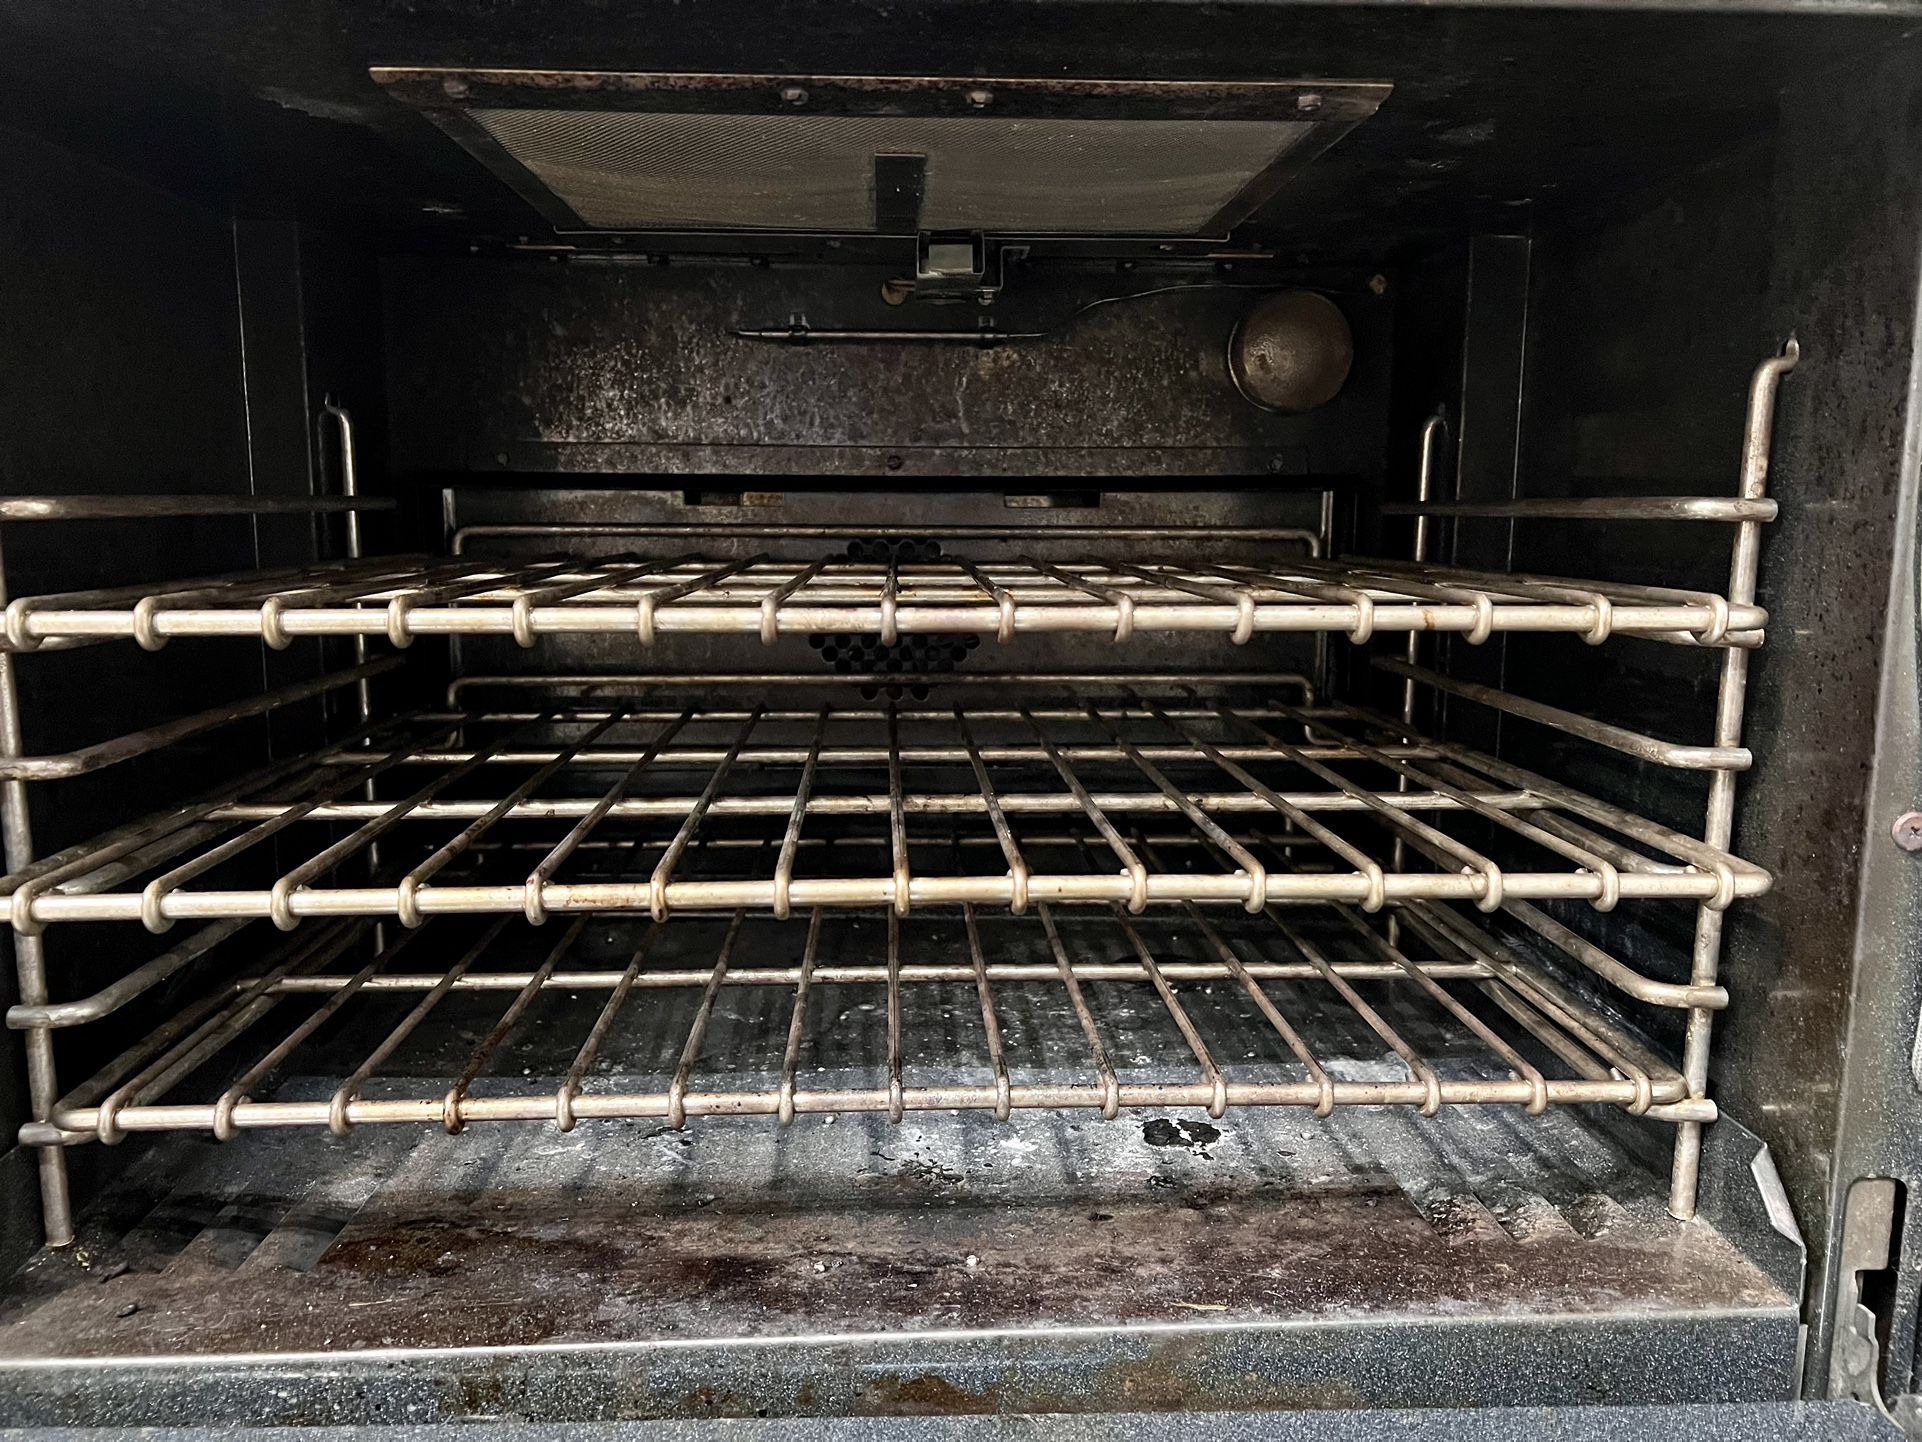 Viking Professional 5 Series 30” Stainless Steel Gas range for Sale in  Chicago, IL - OfferUp